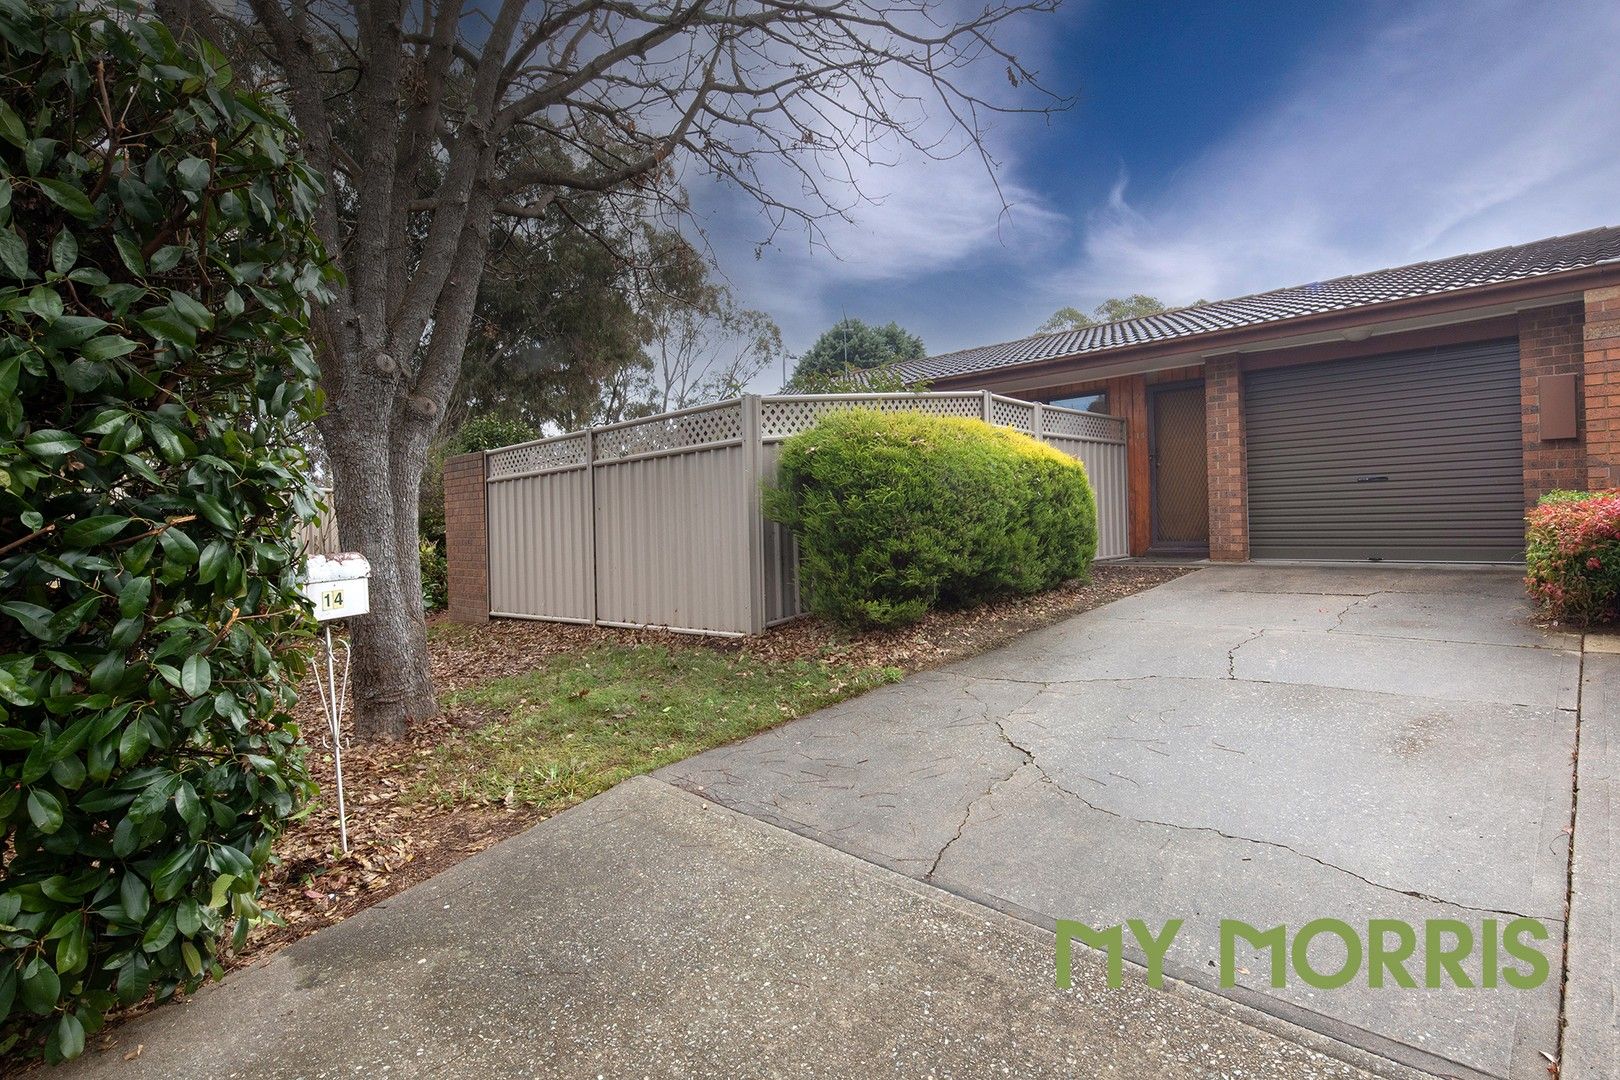 2 bedrooms Townhouse in 14/53 Ashby Circuit KAMBAH ACT, 2902